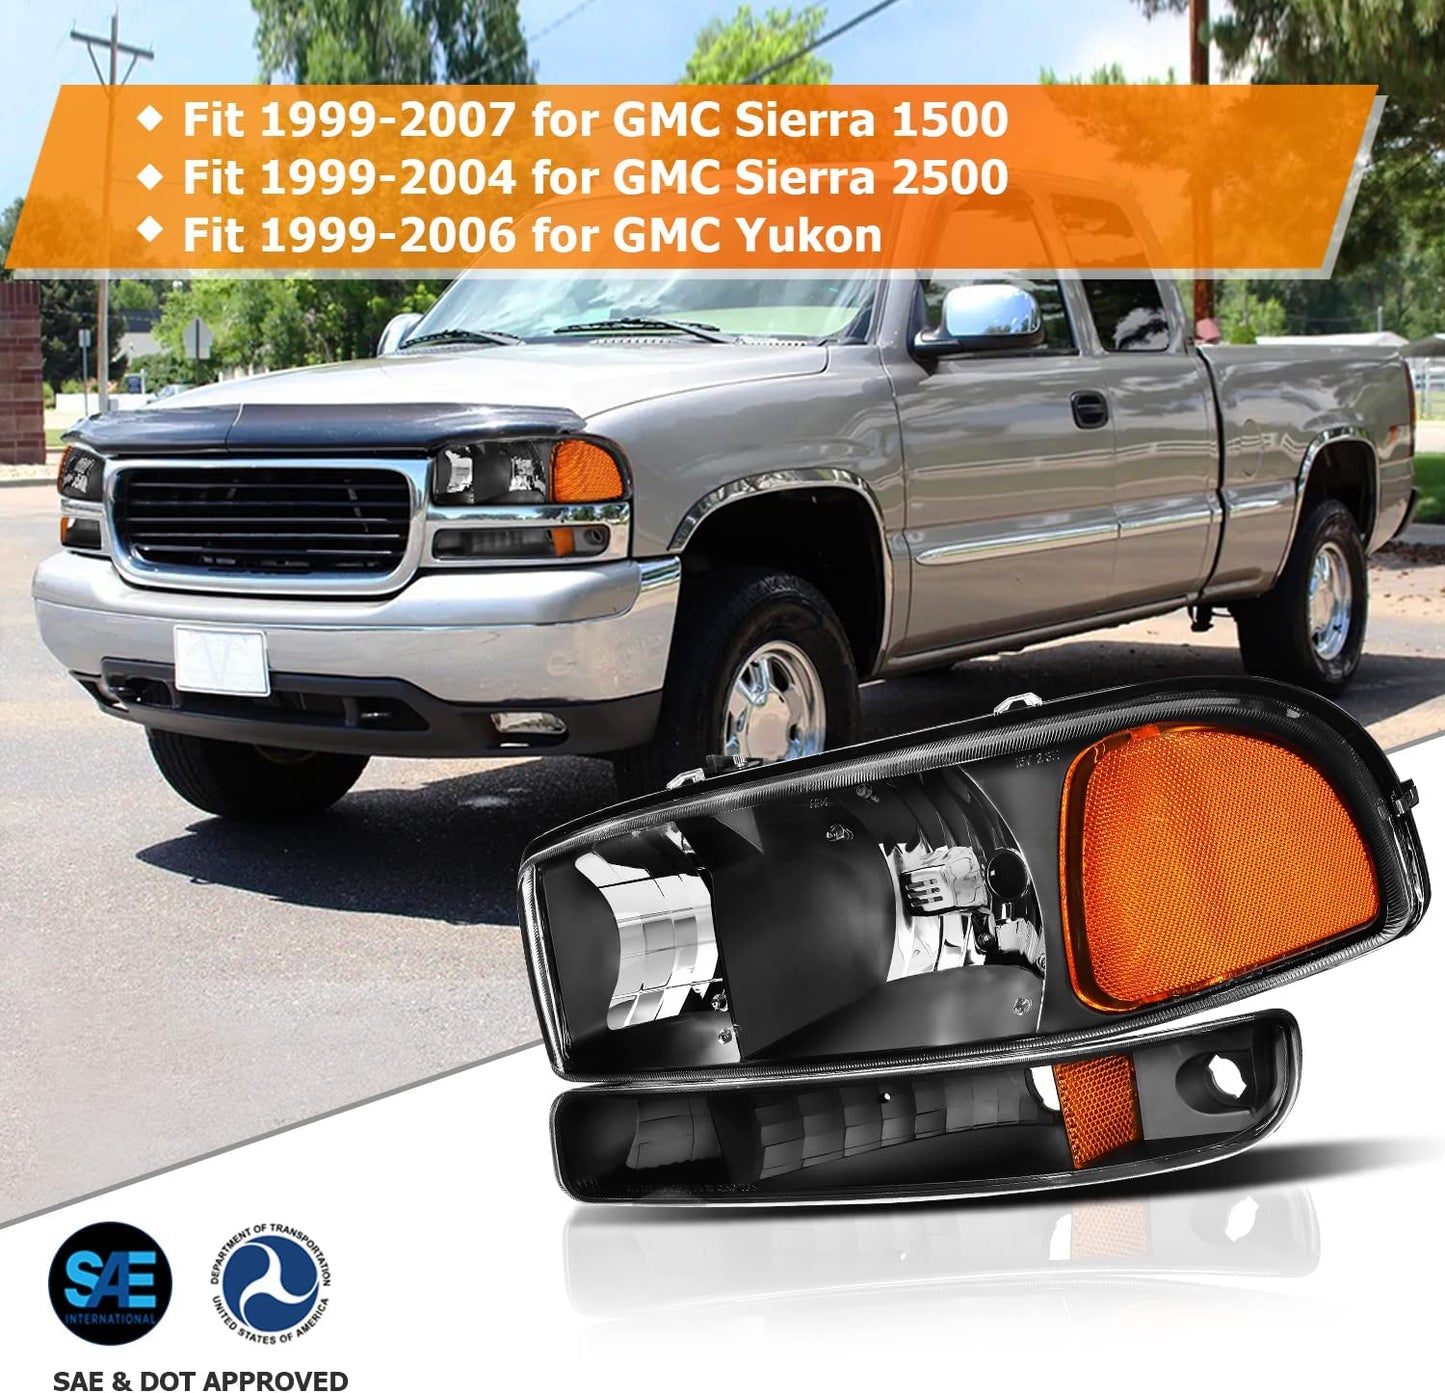 LBRST Headlight Assembly For GMC Sierra 1500 1999-2006 For GMC Sierra 1500 Classic 2007 For GMC Sierra 2500 1999-2004 Black Housing Amber Reflector Clear Lens Driver and Passenger Side Headlamp